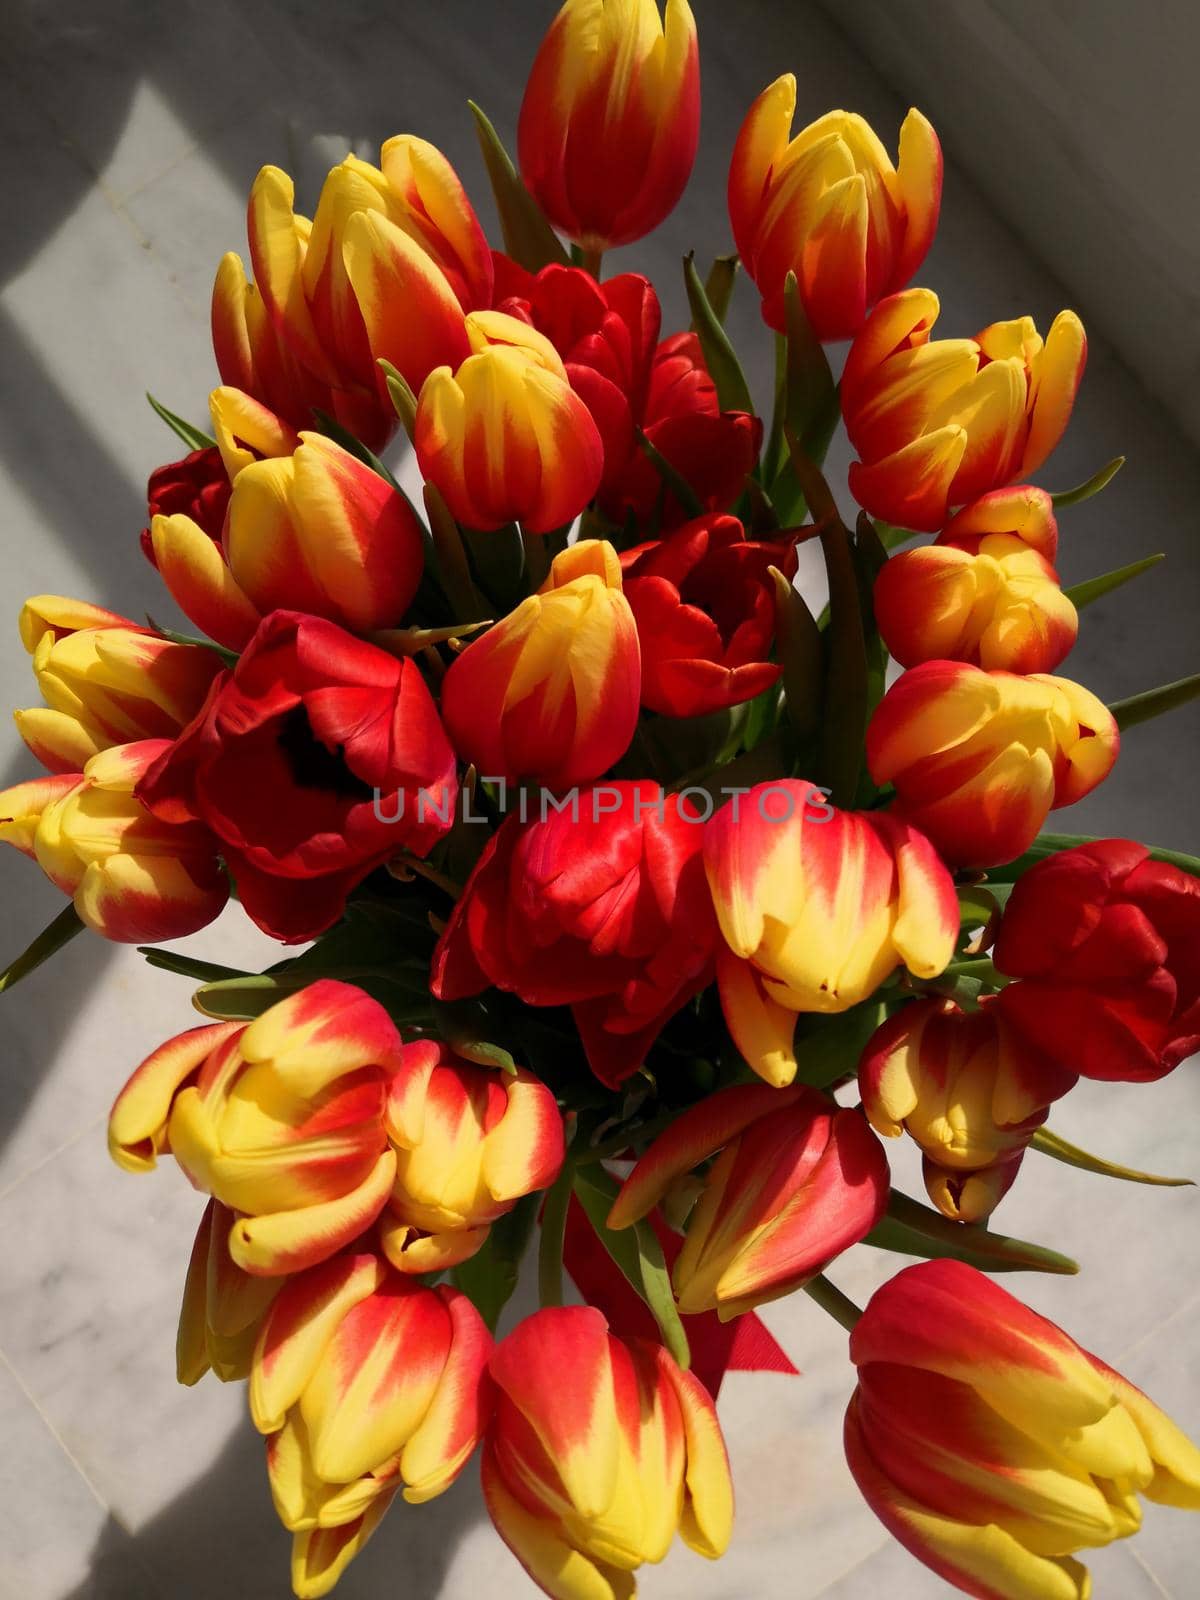 Big bouquet of red and yellow tulips. Spring tulips, big bunch, top view